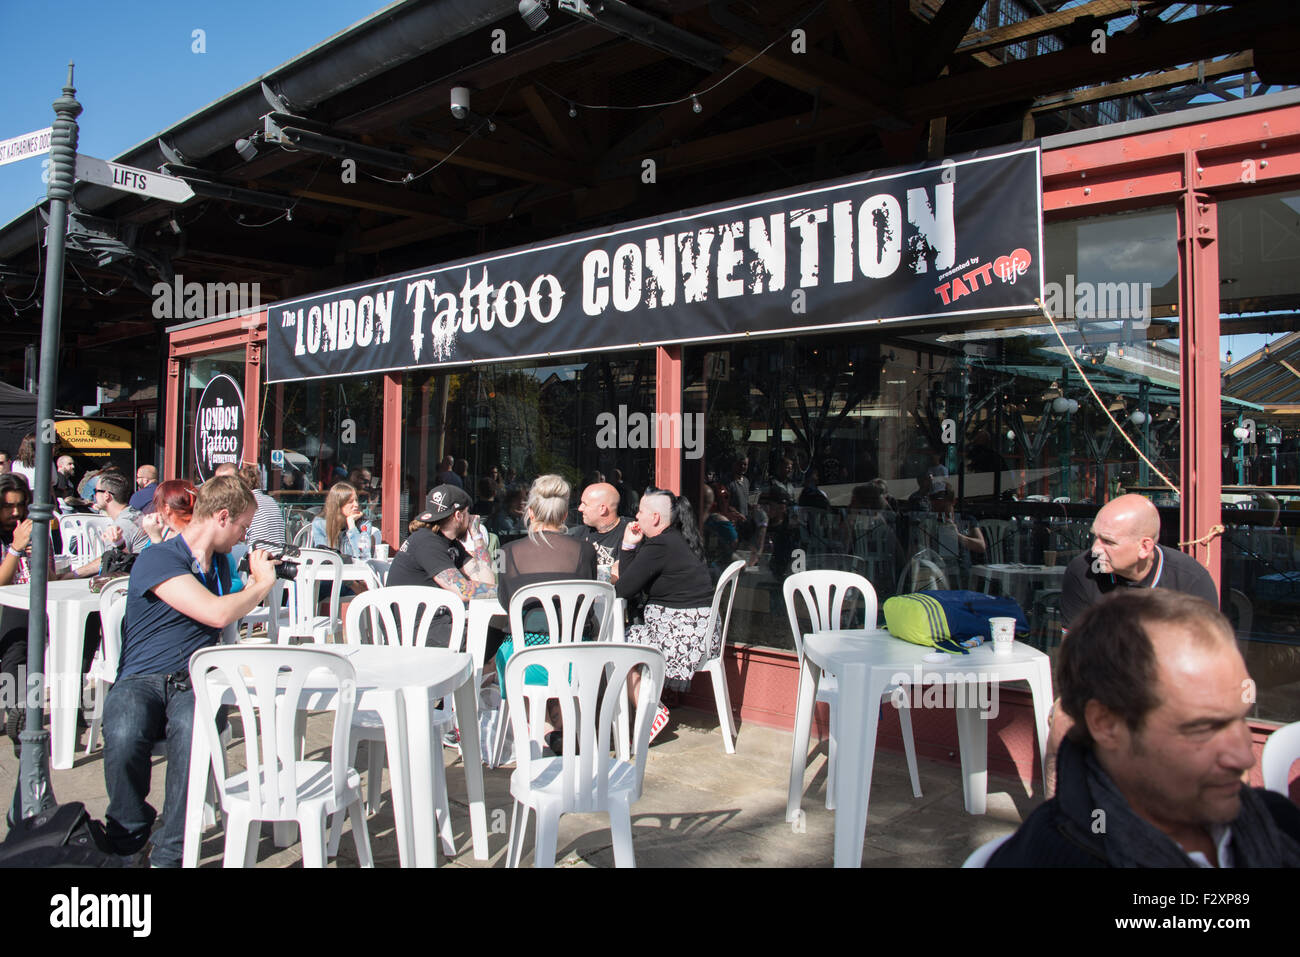 London, UK. 25th September, 2015. The 11th International London Tattoo Convention on 25th September 2015 at Tobacco Dock, Tower Hamlets, London, UK. Tattoo artists, fan and performers from around the world gather at Tobacco Dock for the three day convention. Credit:  Terence Mendoza/Alamy Live News Stock Photo